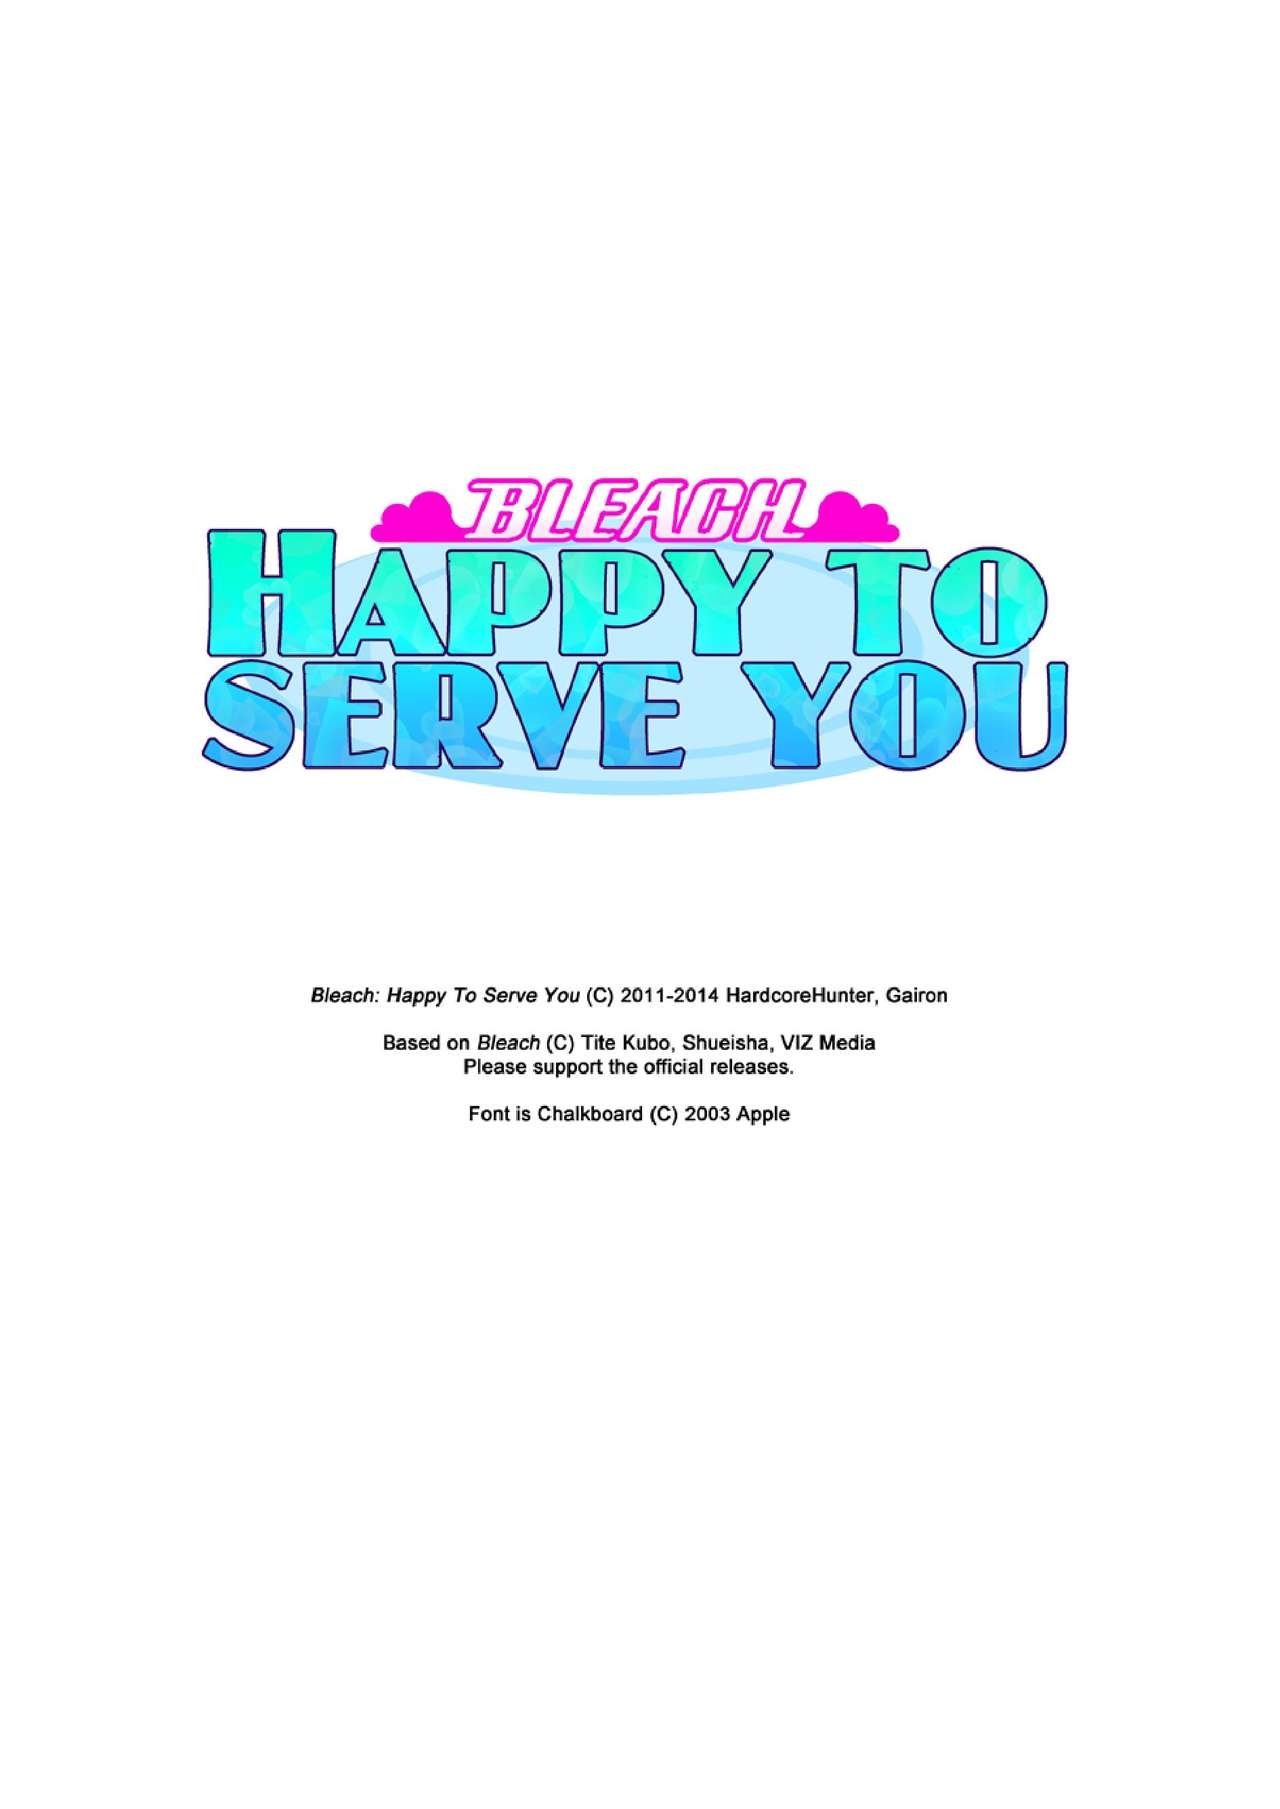 [Gairon] Happy to Serve You - Chapter 9 (Bleach) 1